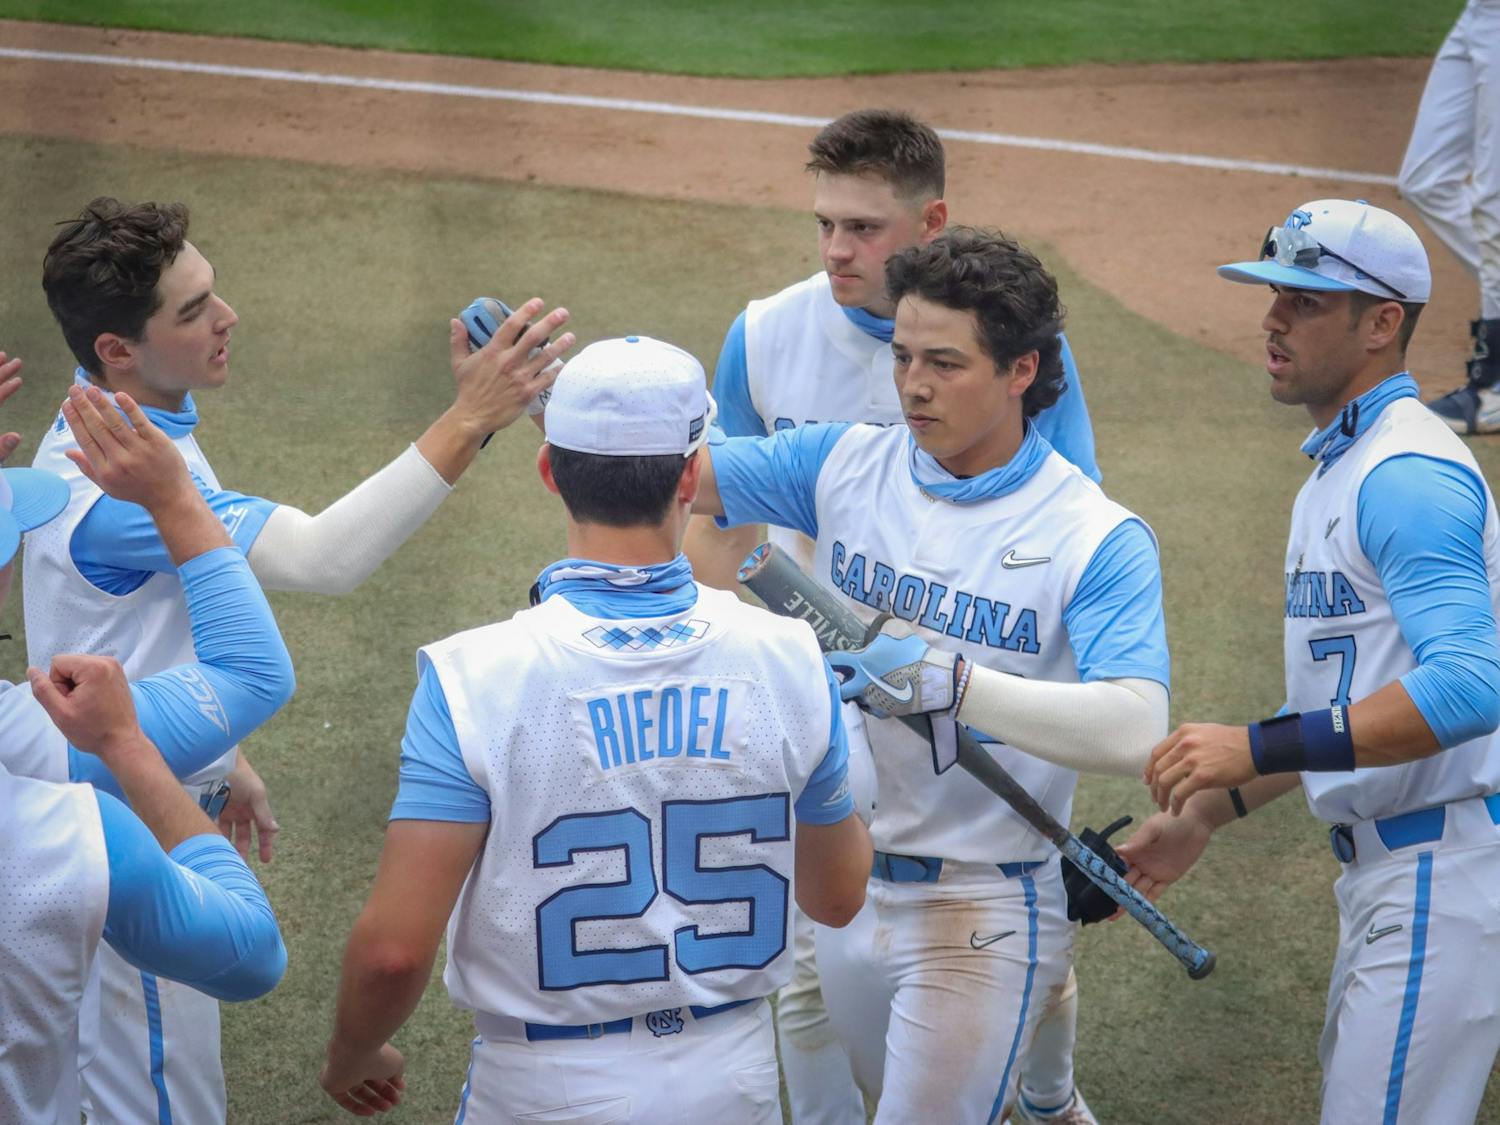 UNC sophomore outfielder Angel Zarate (40) is congratulated by his teammates for his home run during the Tar Heels' 1-6 loss against N.C. State on Saturday, March 27, 2021 in Boshamer Stadium in Chapel Hill, N.C. Zarate's home run was UNC's only score during the game.